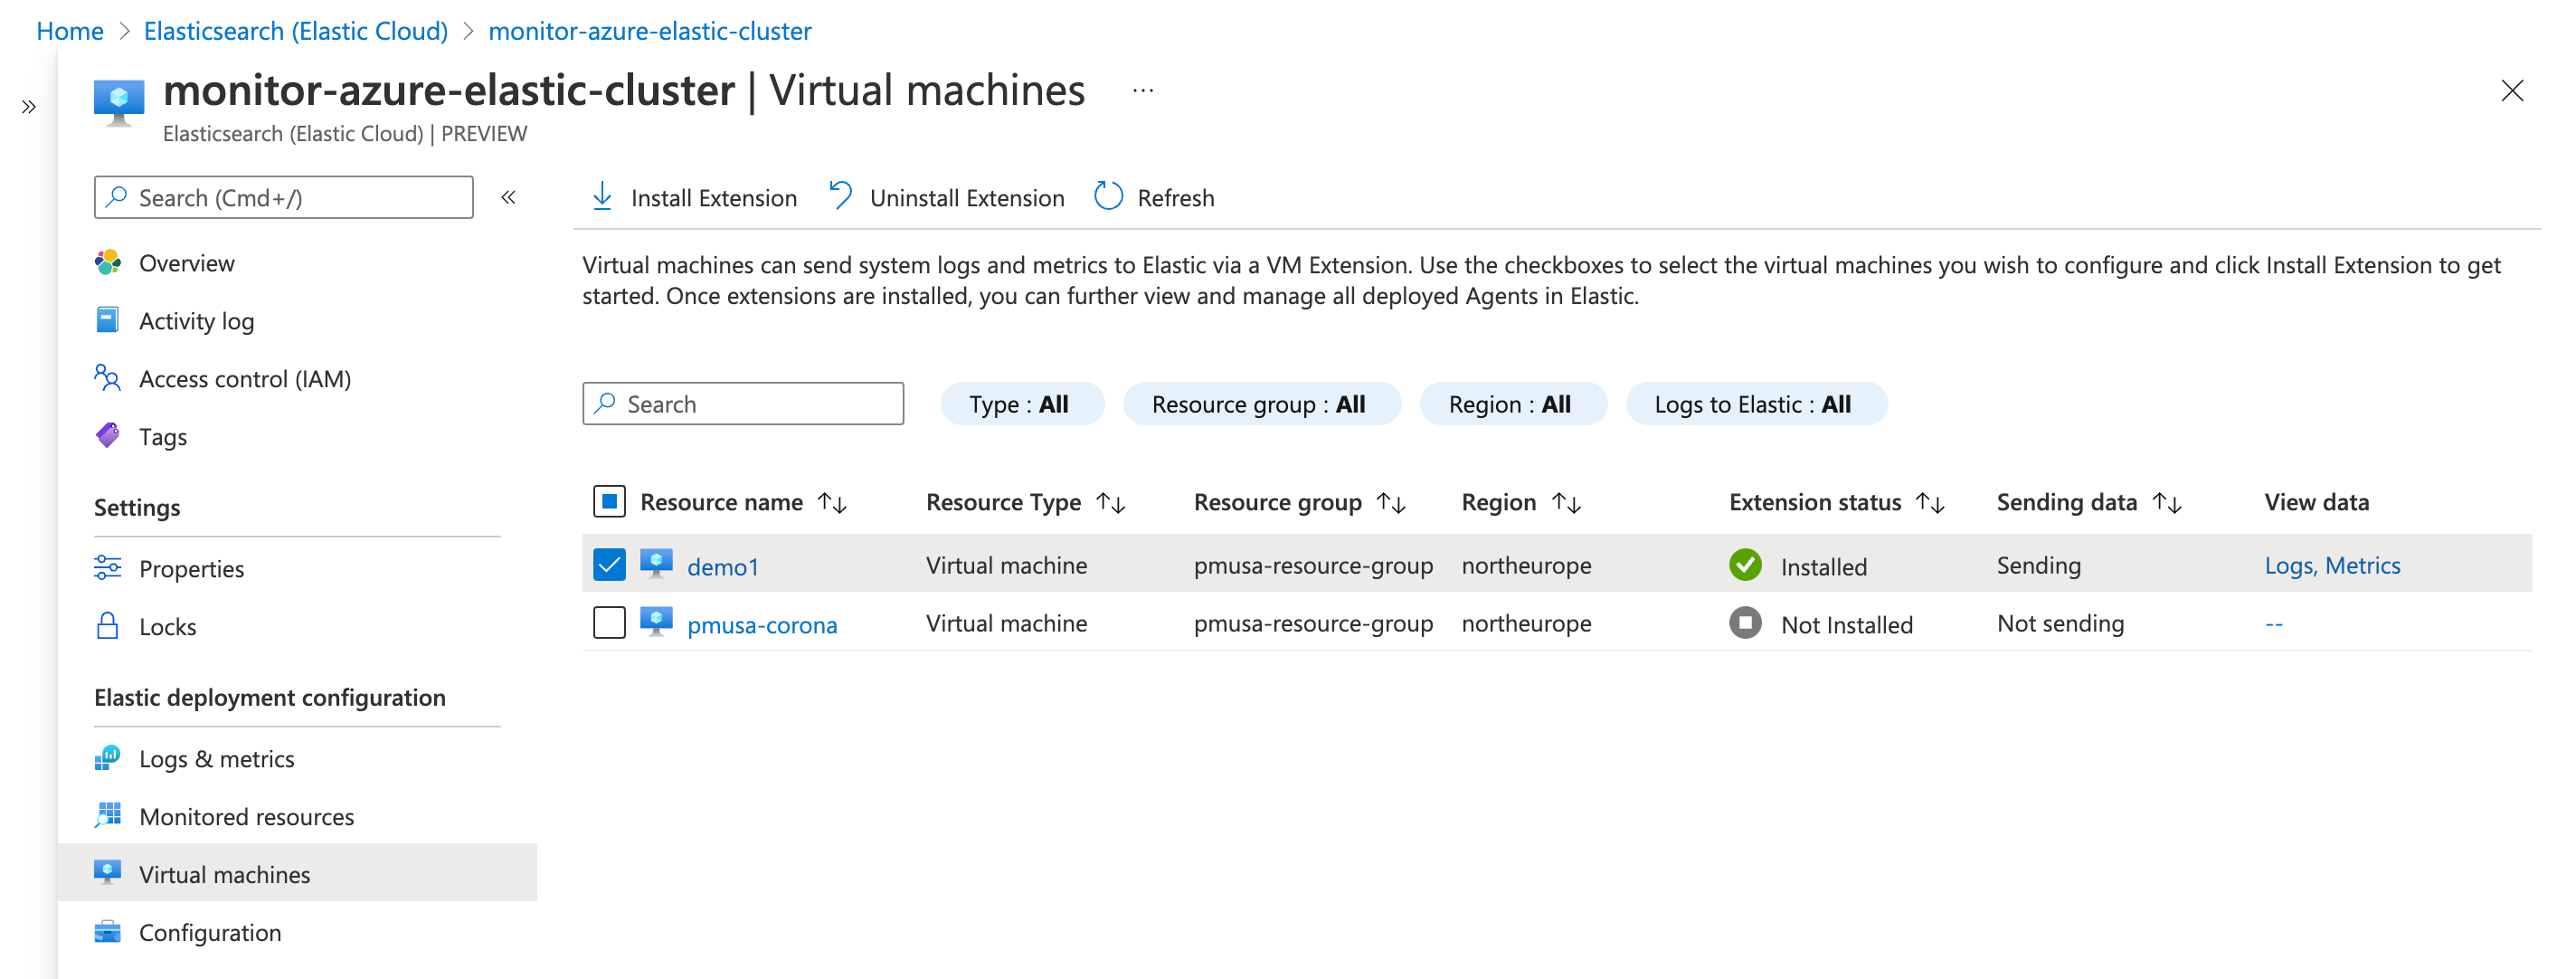 Select VMs to collect logs and metrics from